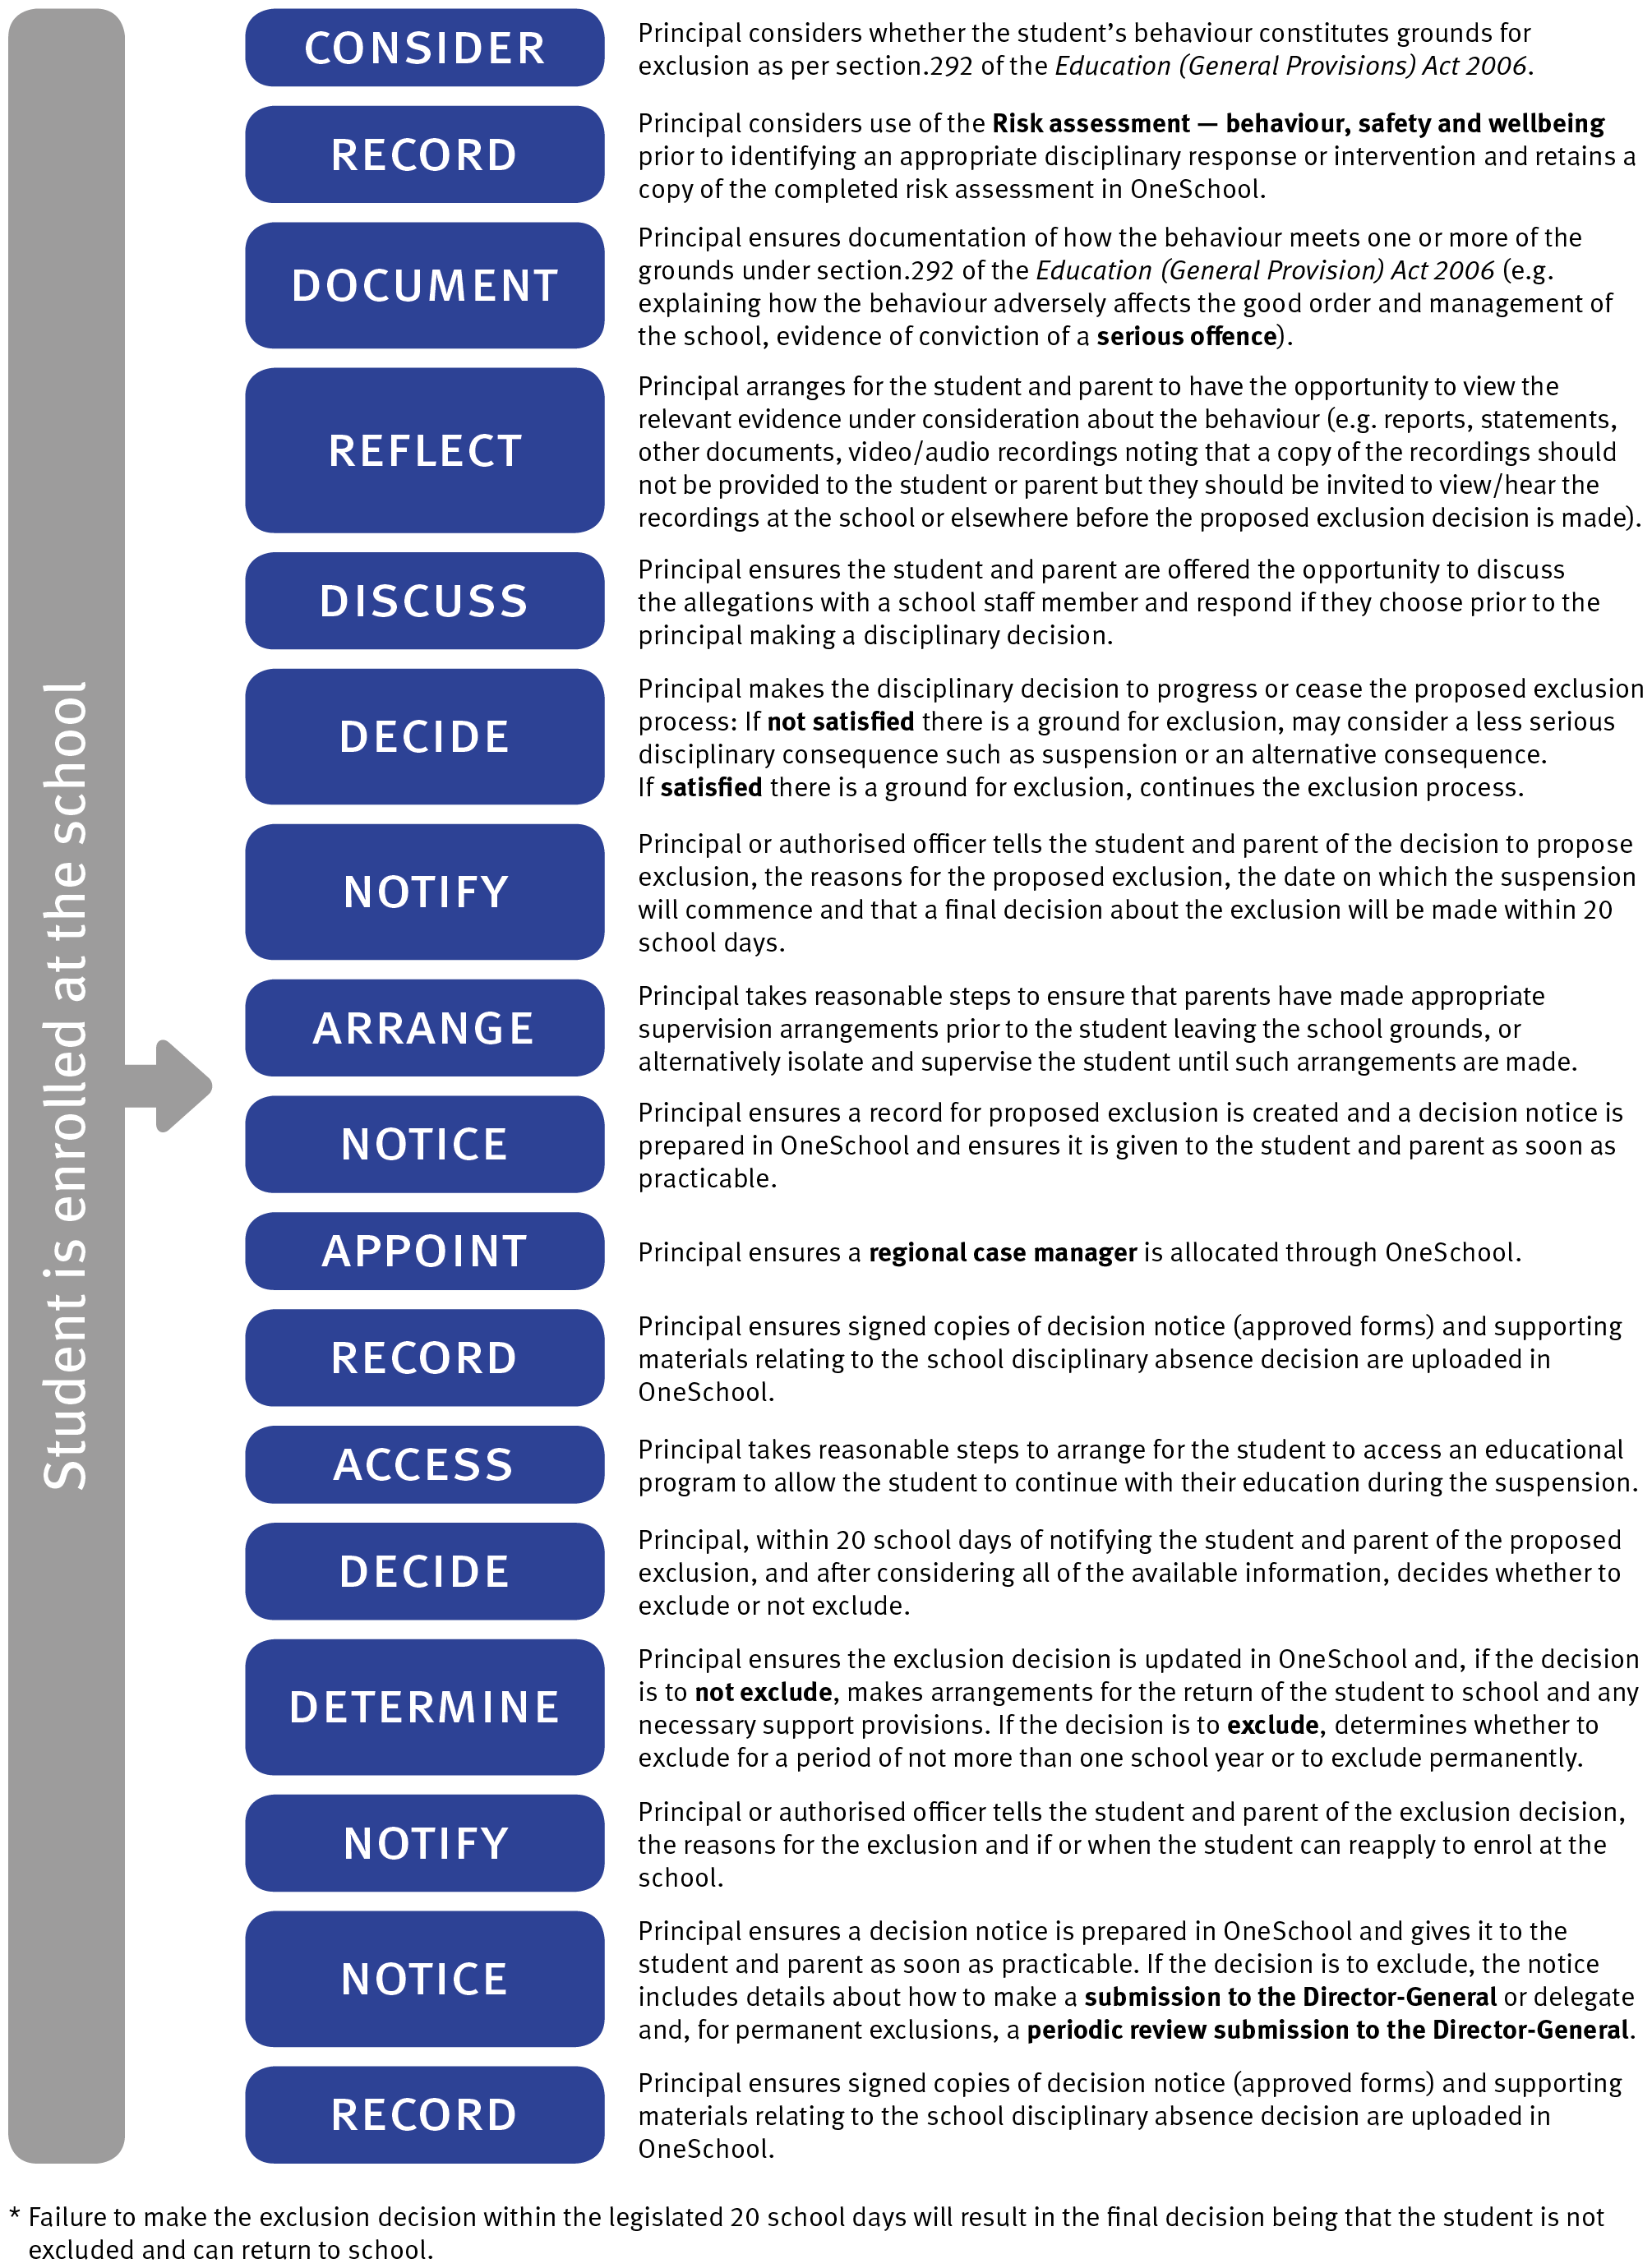 Flowchart showing steps for Principal to process exclusion where a student is enrolled at the school as: 1. Consider 2. Record 3. Document 4. Reflect 5. Discuss 6. Decide 7. Notify 8. Arrange 9. Notice 10. Appoint 11. Record 12. Access 13. Decide 14. Determine 15. Notify 16. Notice 17. Record